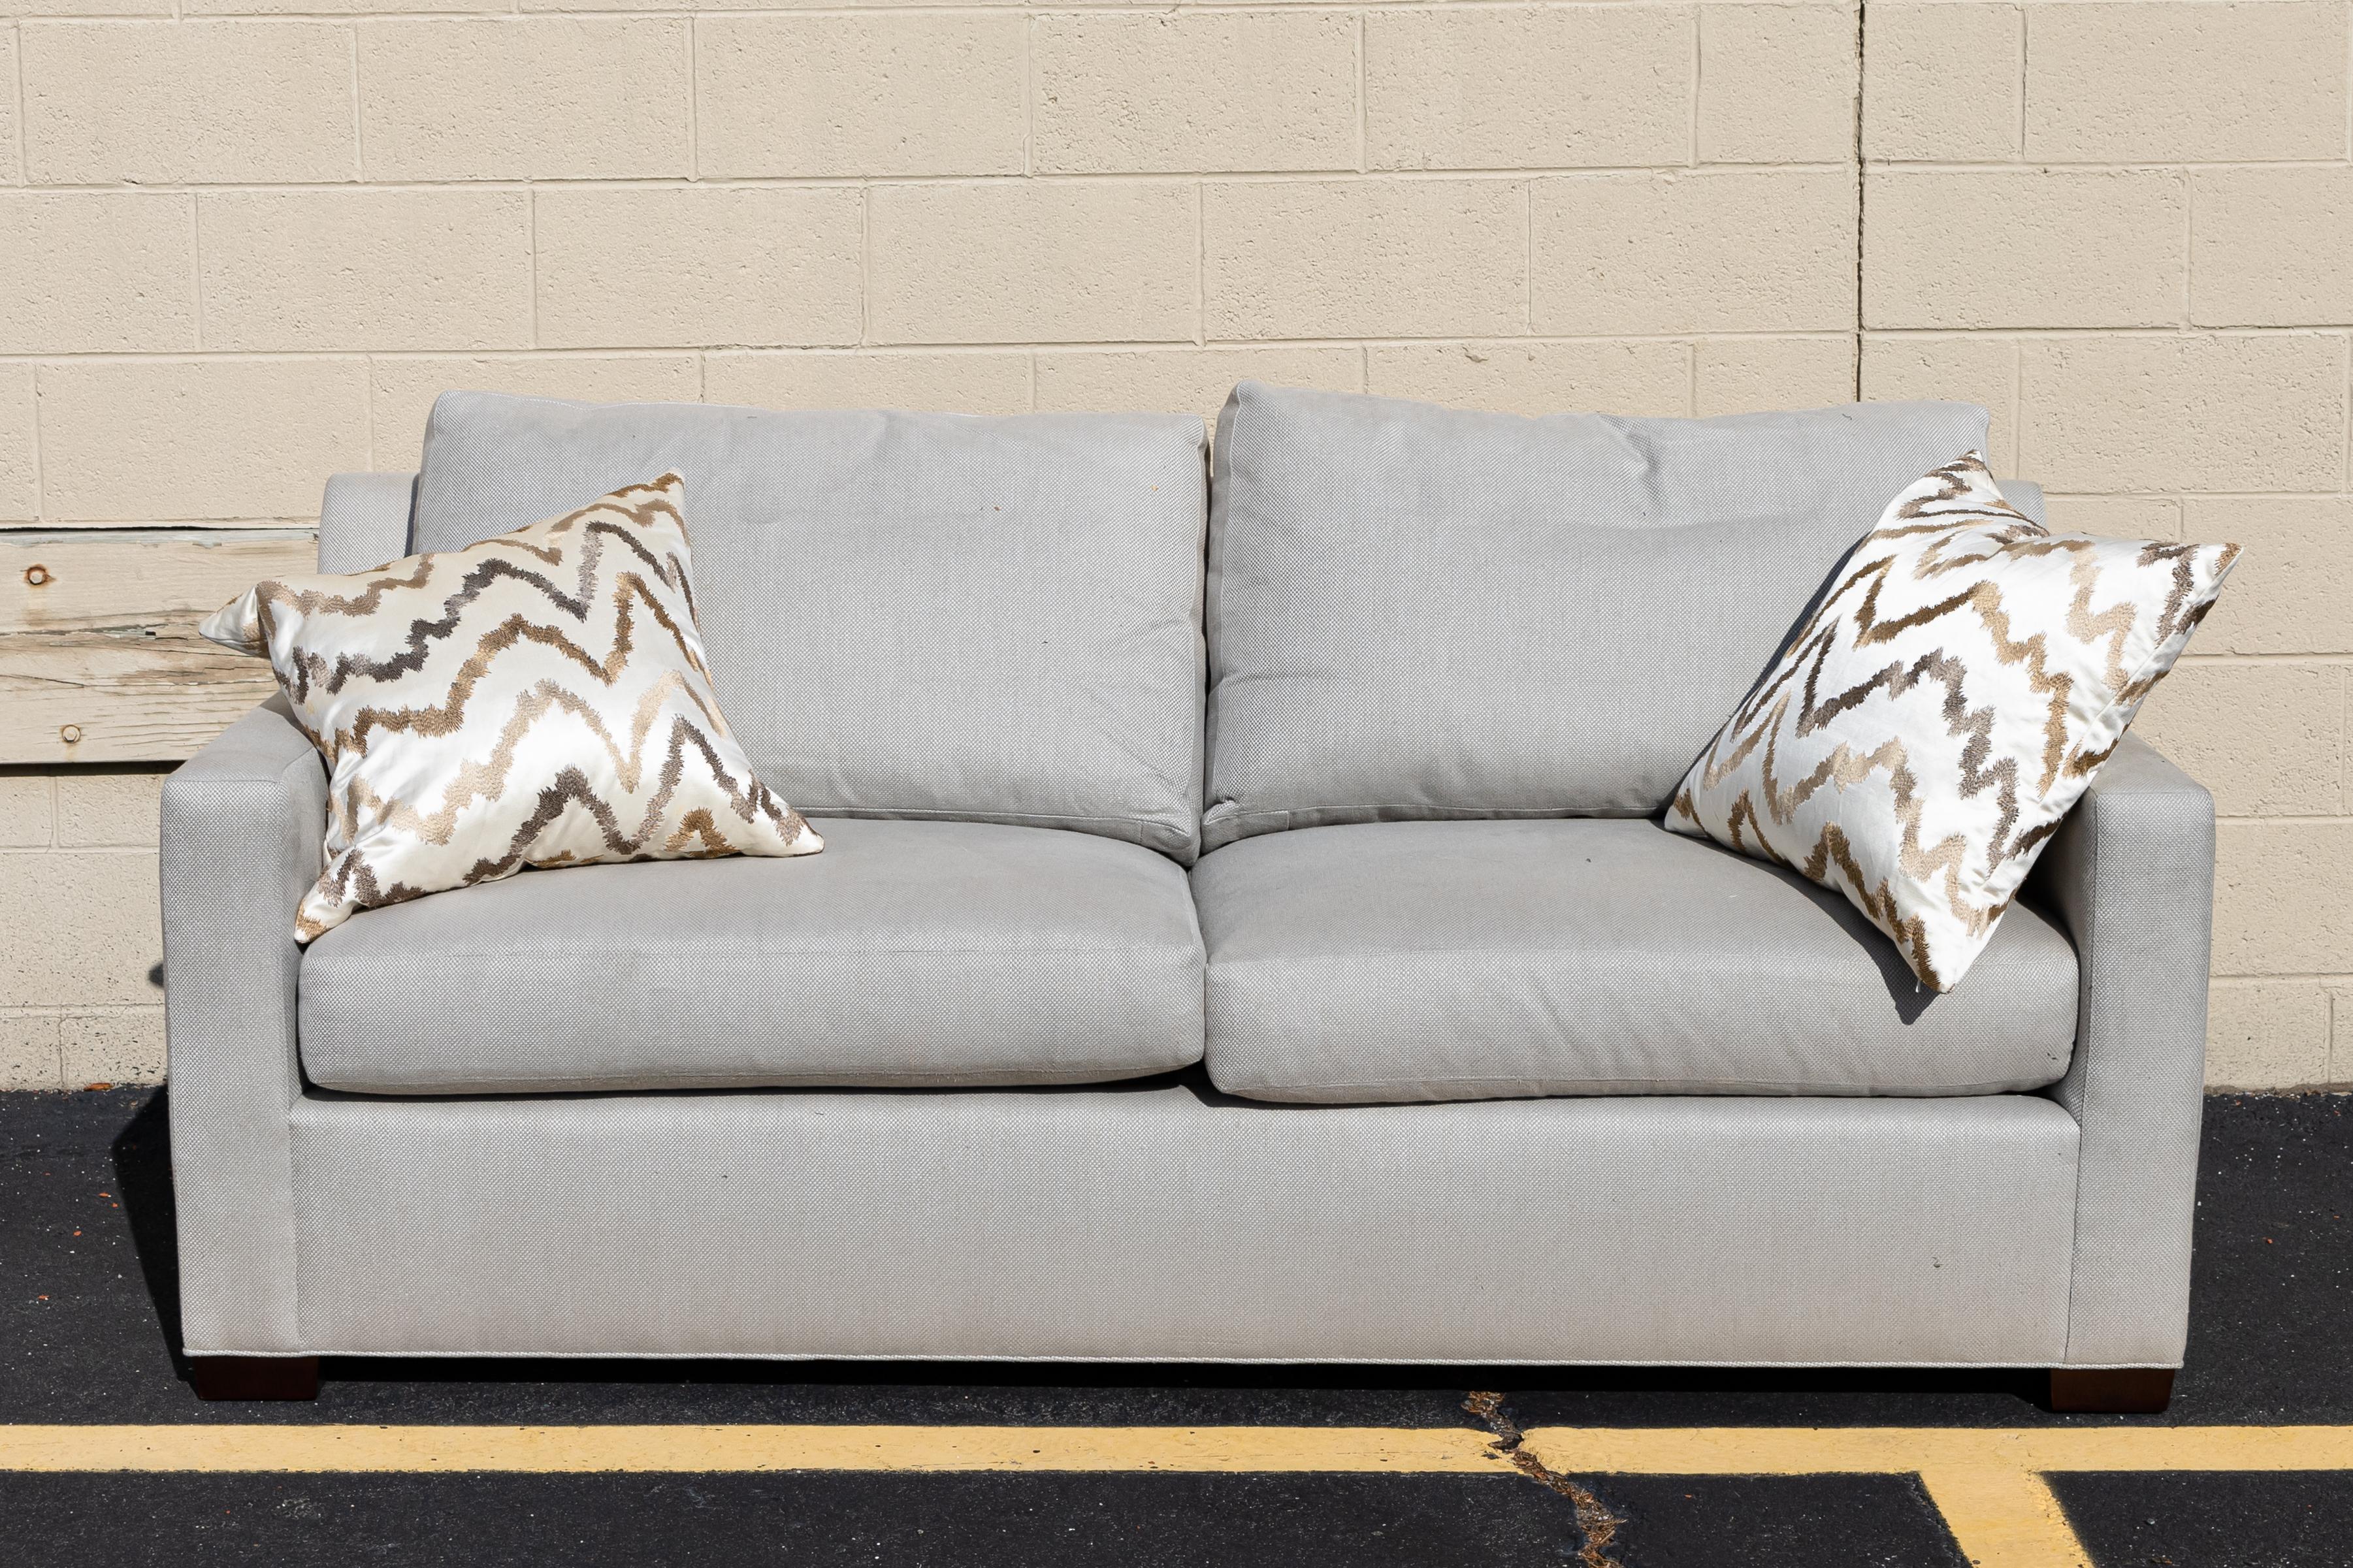 A pair of matching modern contemporary Baker sofa and love seat. These sofas come with matching cushions and pillows. They are removable from the couch. Both of these pieces are in very good condition with slight wear on the legs reasonable for used